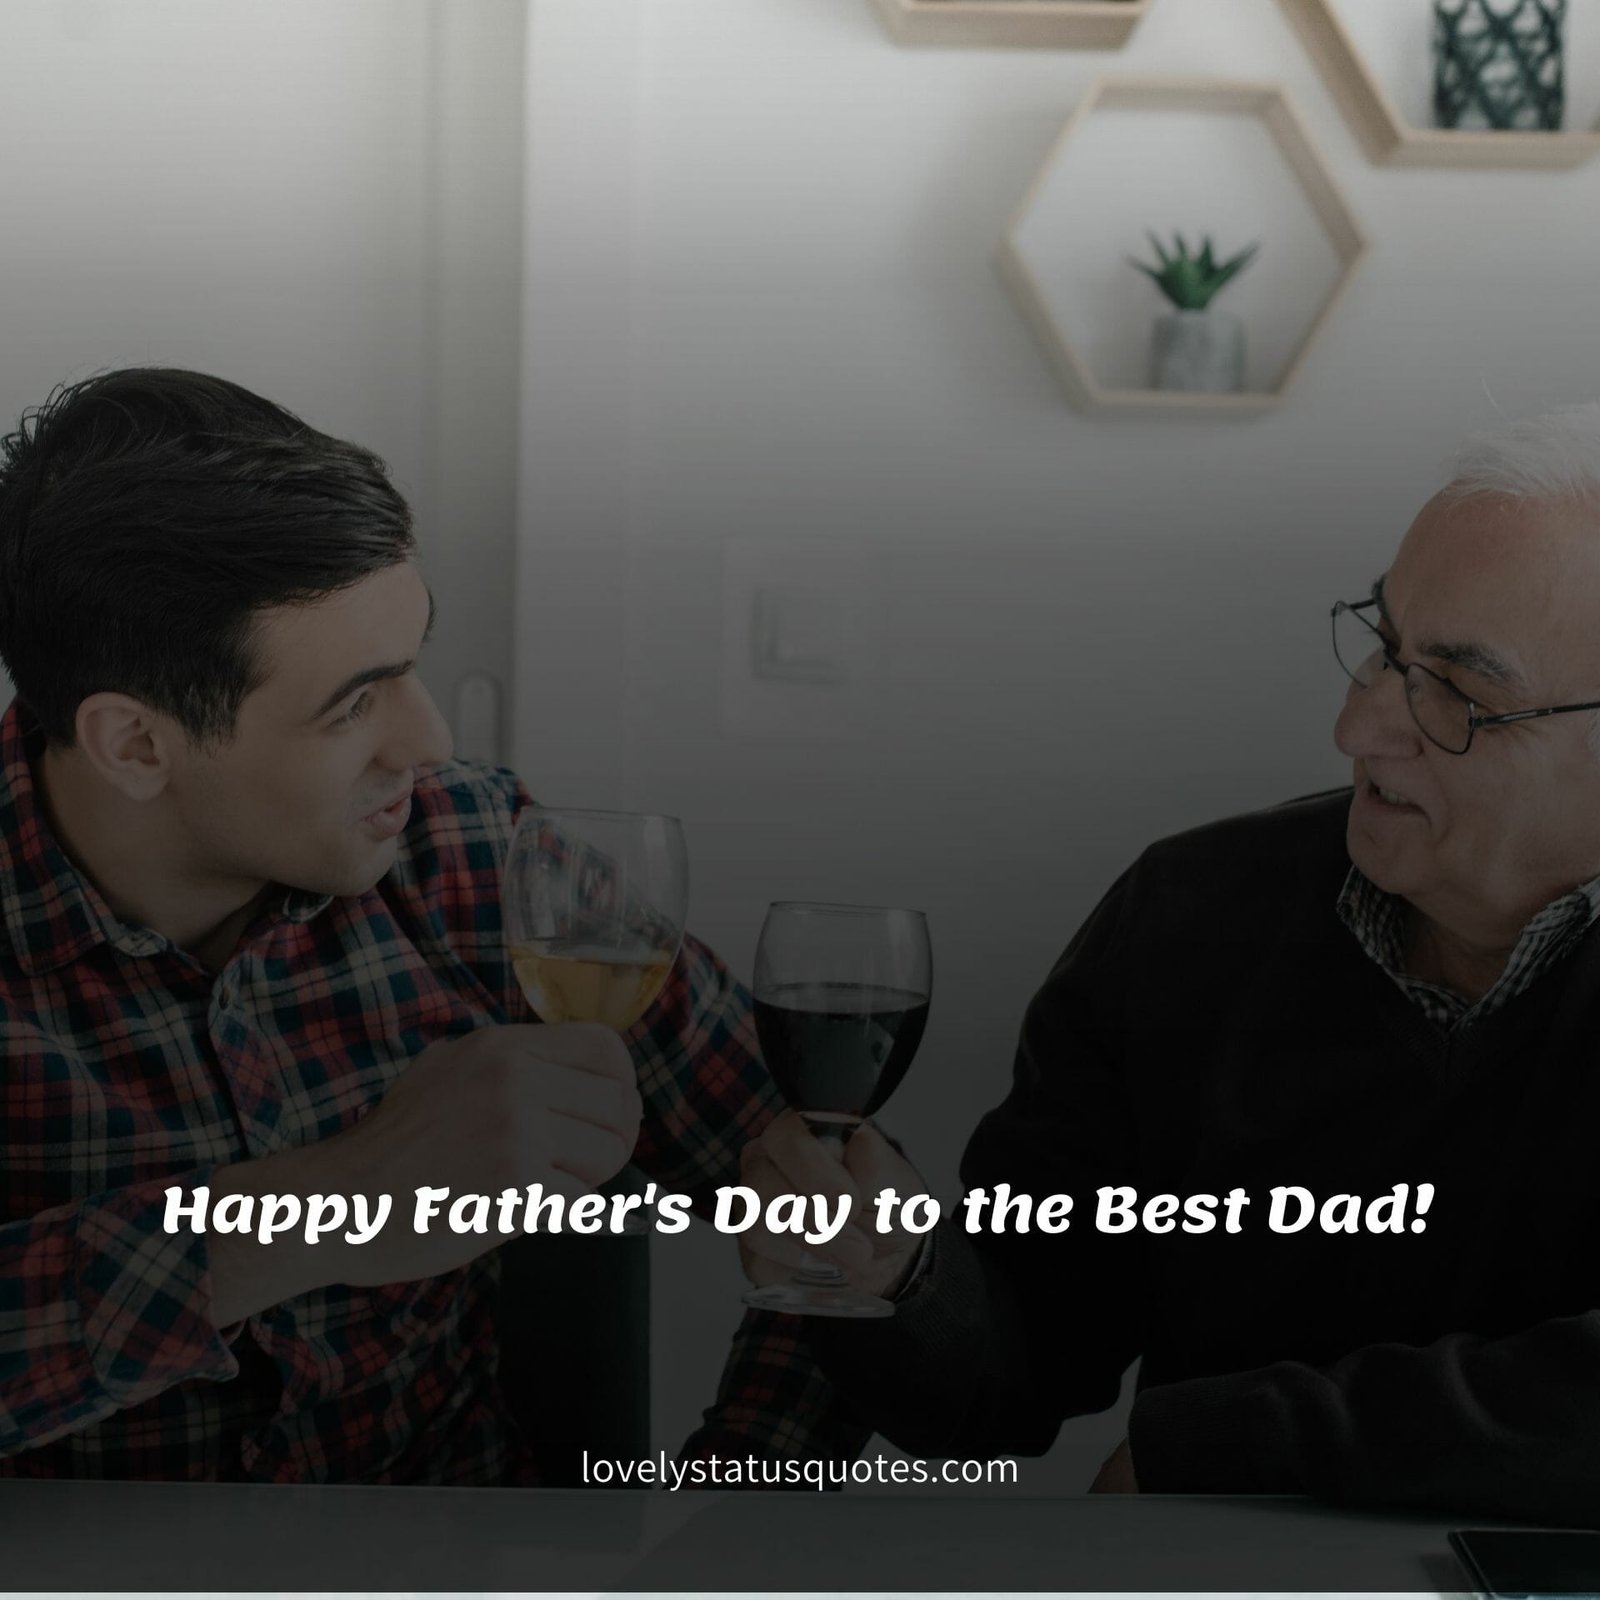 Father's day wishes photos